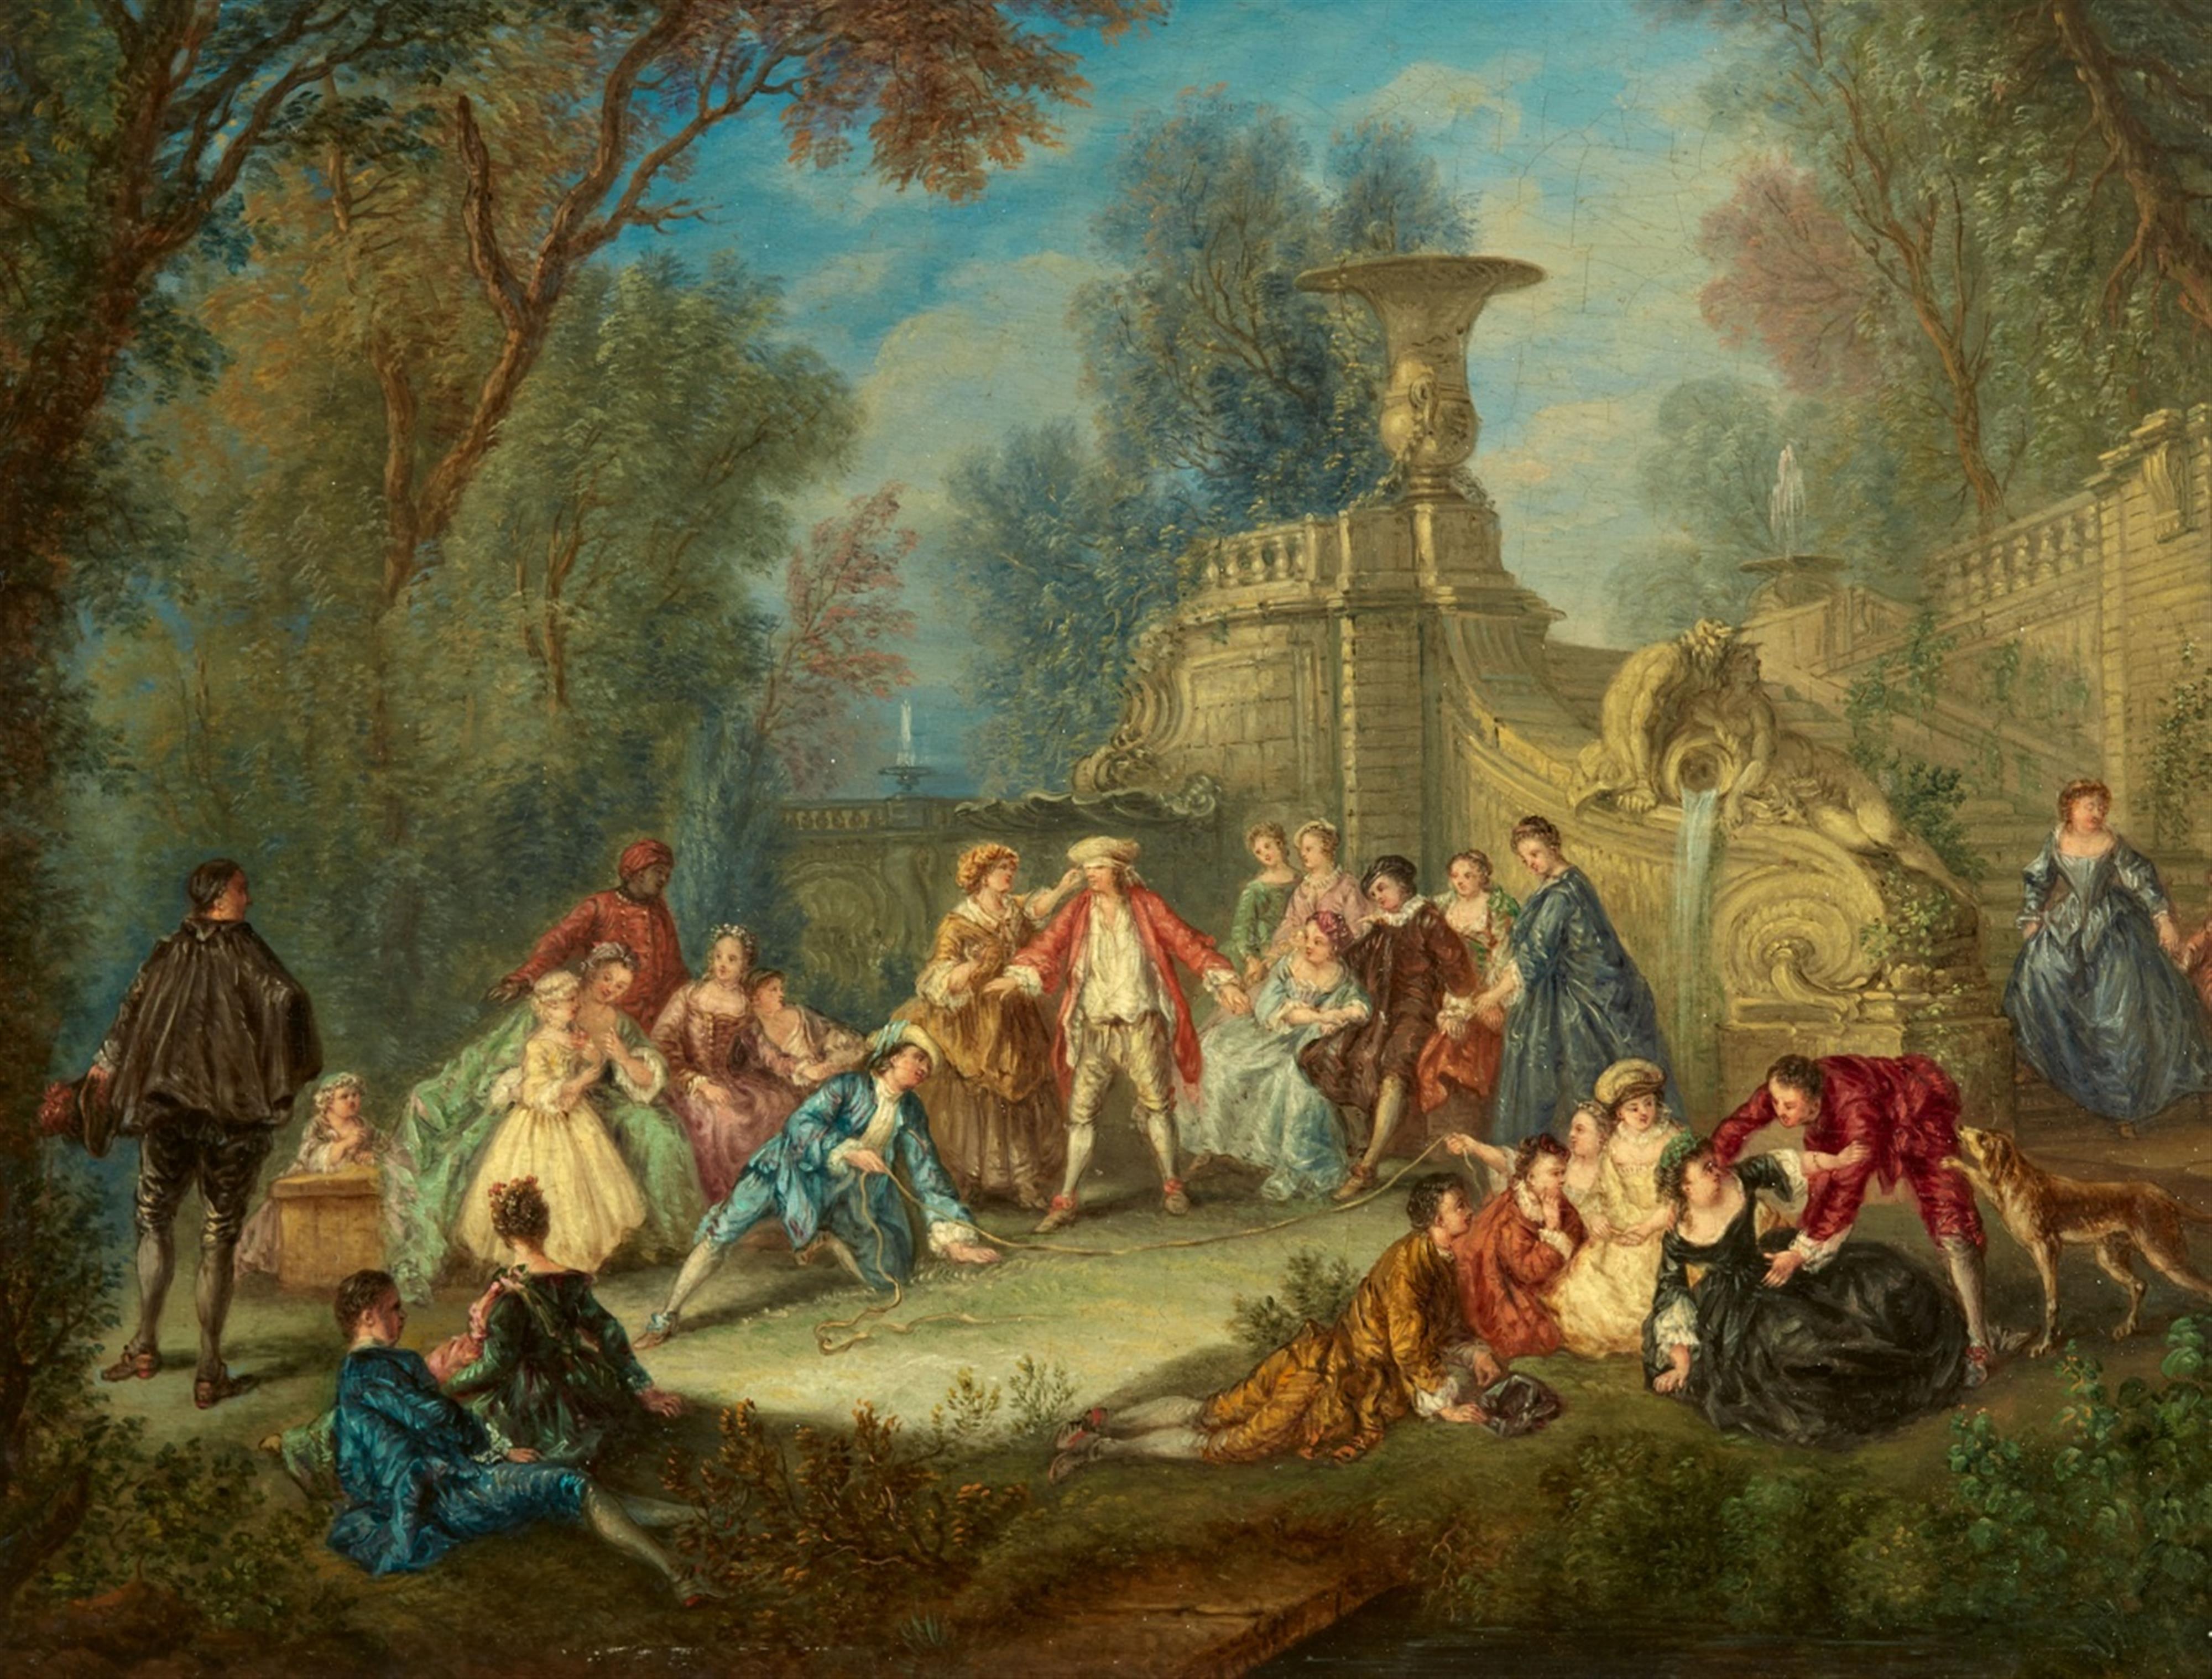 Antoine Watteau, copy after - Fête Galante with Blind Man's Buff Fête Galante with Courtly Dancing - image-1